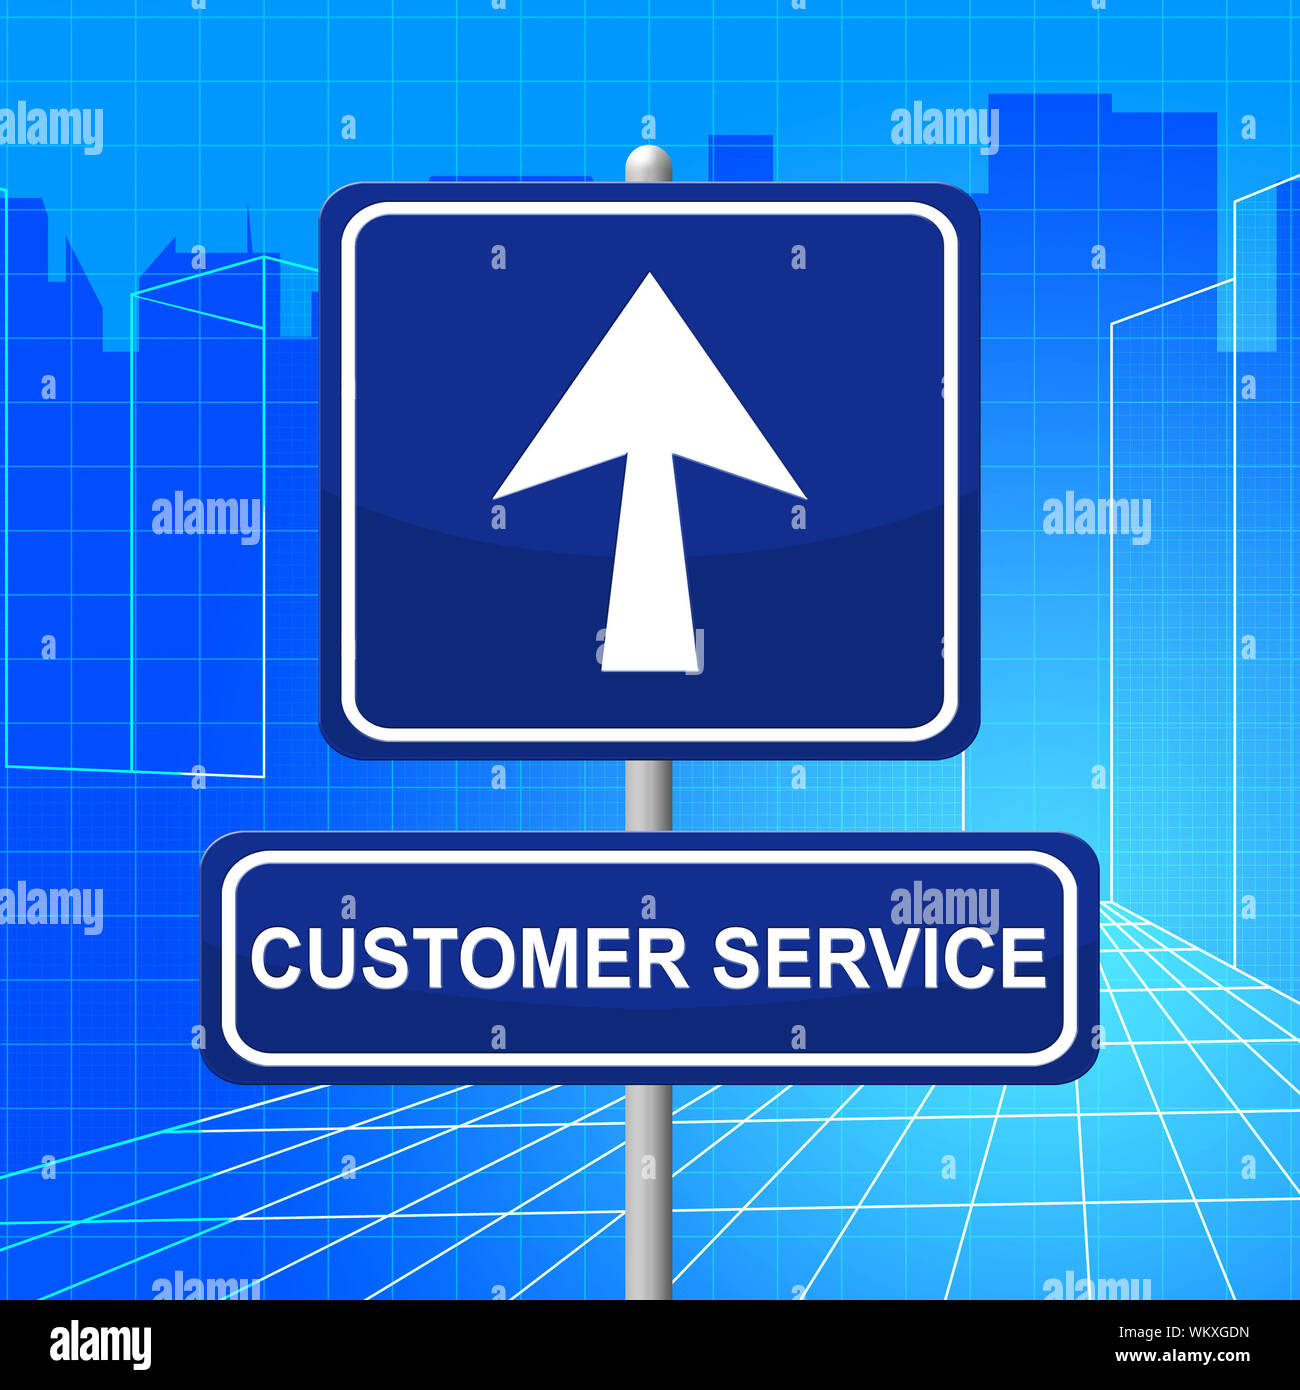 Customer Service Meaning Help Desk And Advice Stock Photo